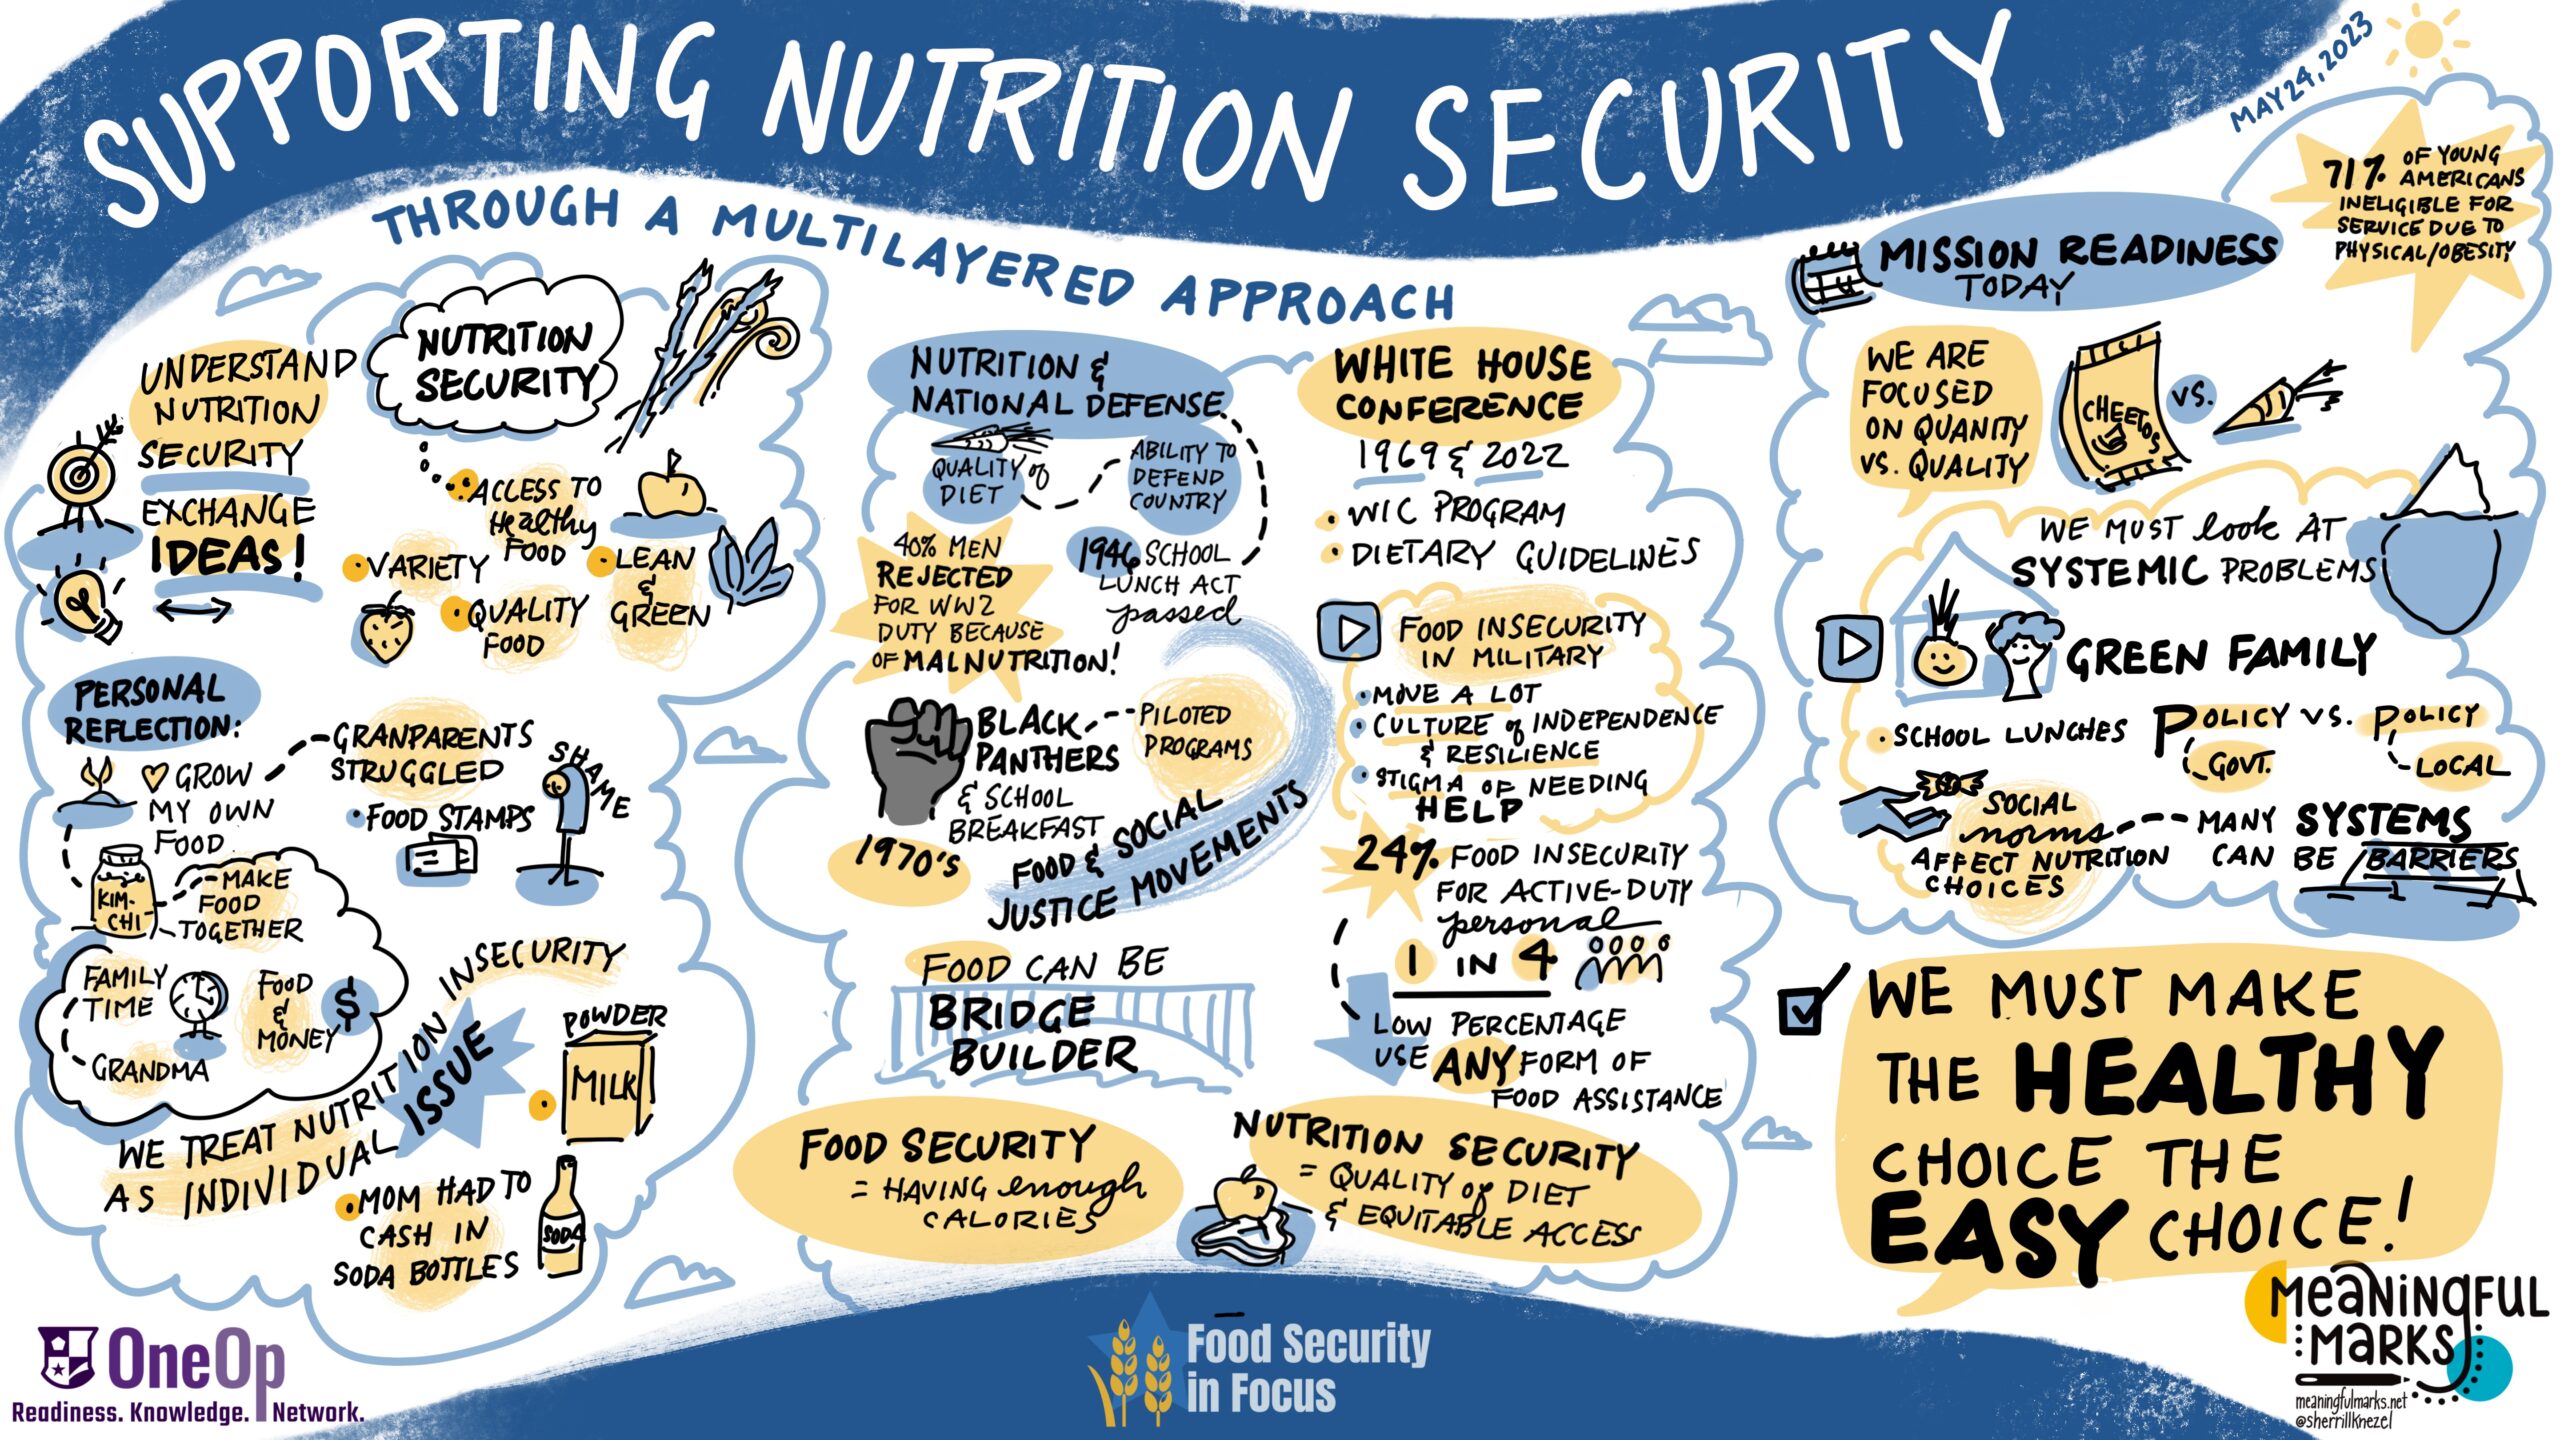 A graphic recording of ideas shared in the Supporting Nutrition Security Workshop